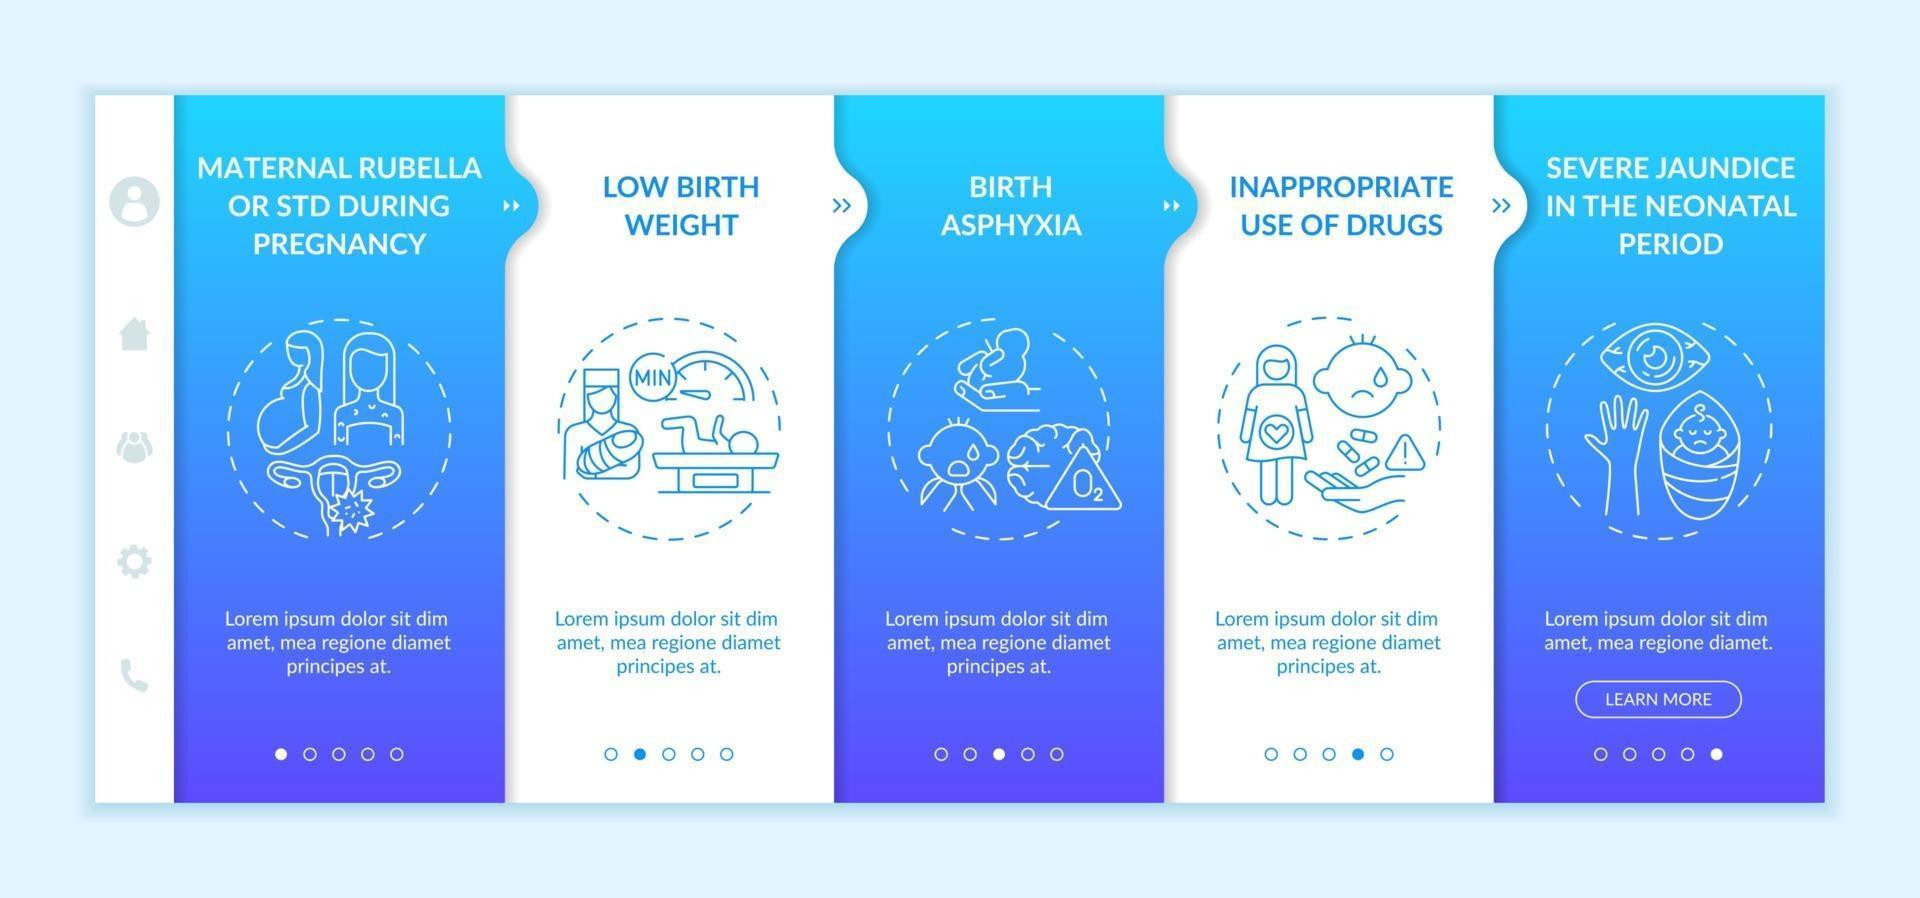 Congenital hearing loss factors onboarding vector template. Responsive mobile website with icons. Web page walkthrough 5 step screens. Severe jaundice, asphyxia color concept with linear illustrations